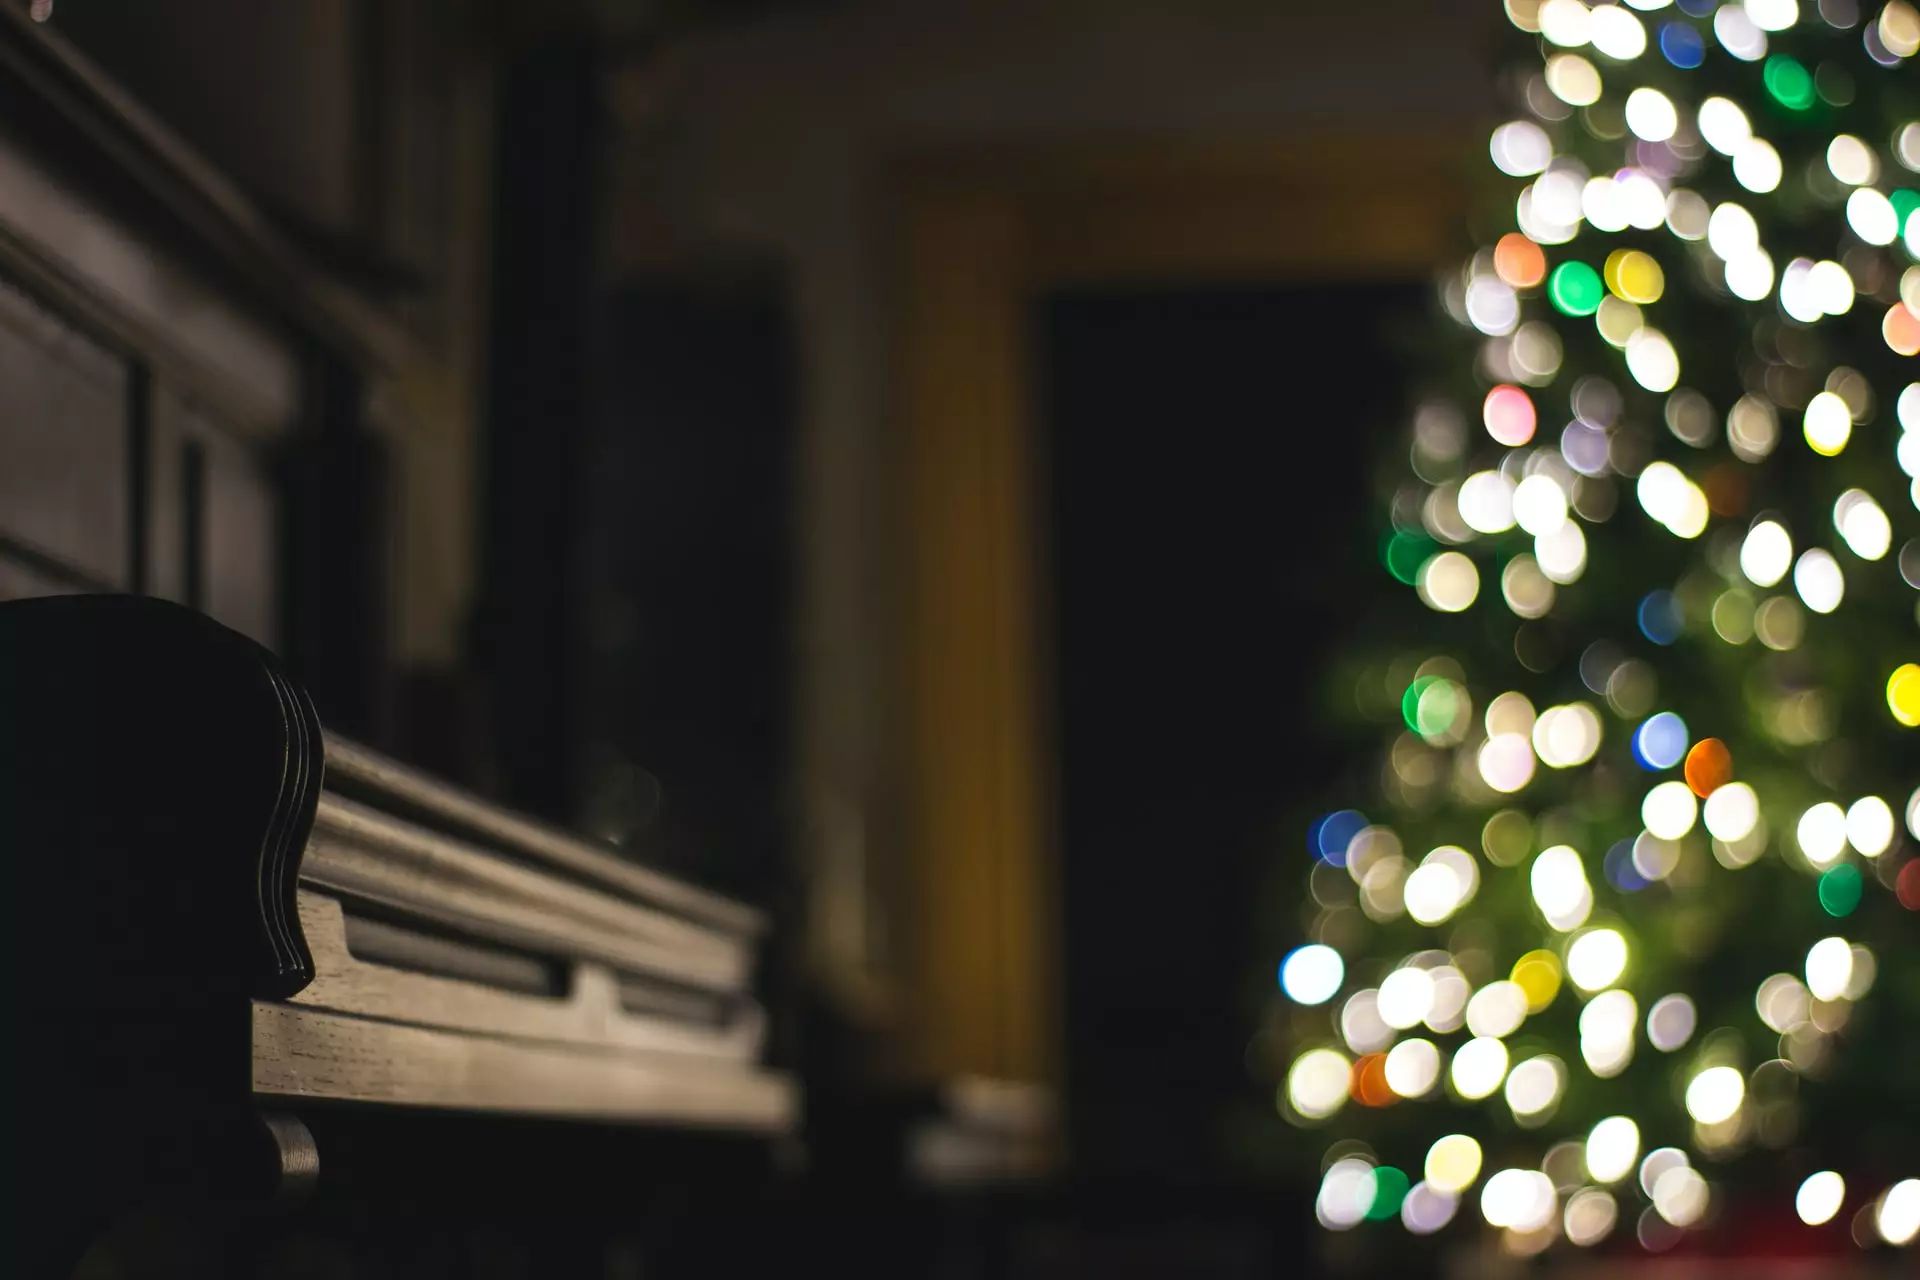 The nation's best Christmas songs were revealed in the study (